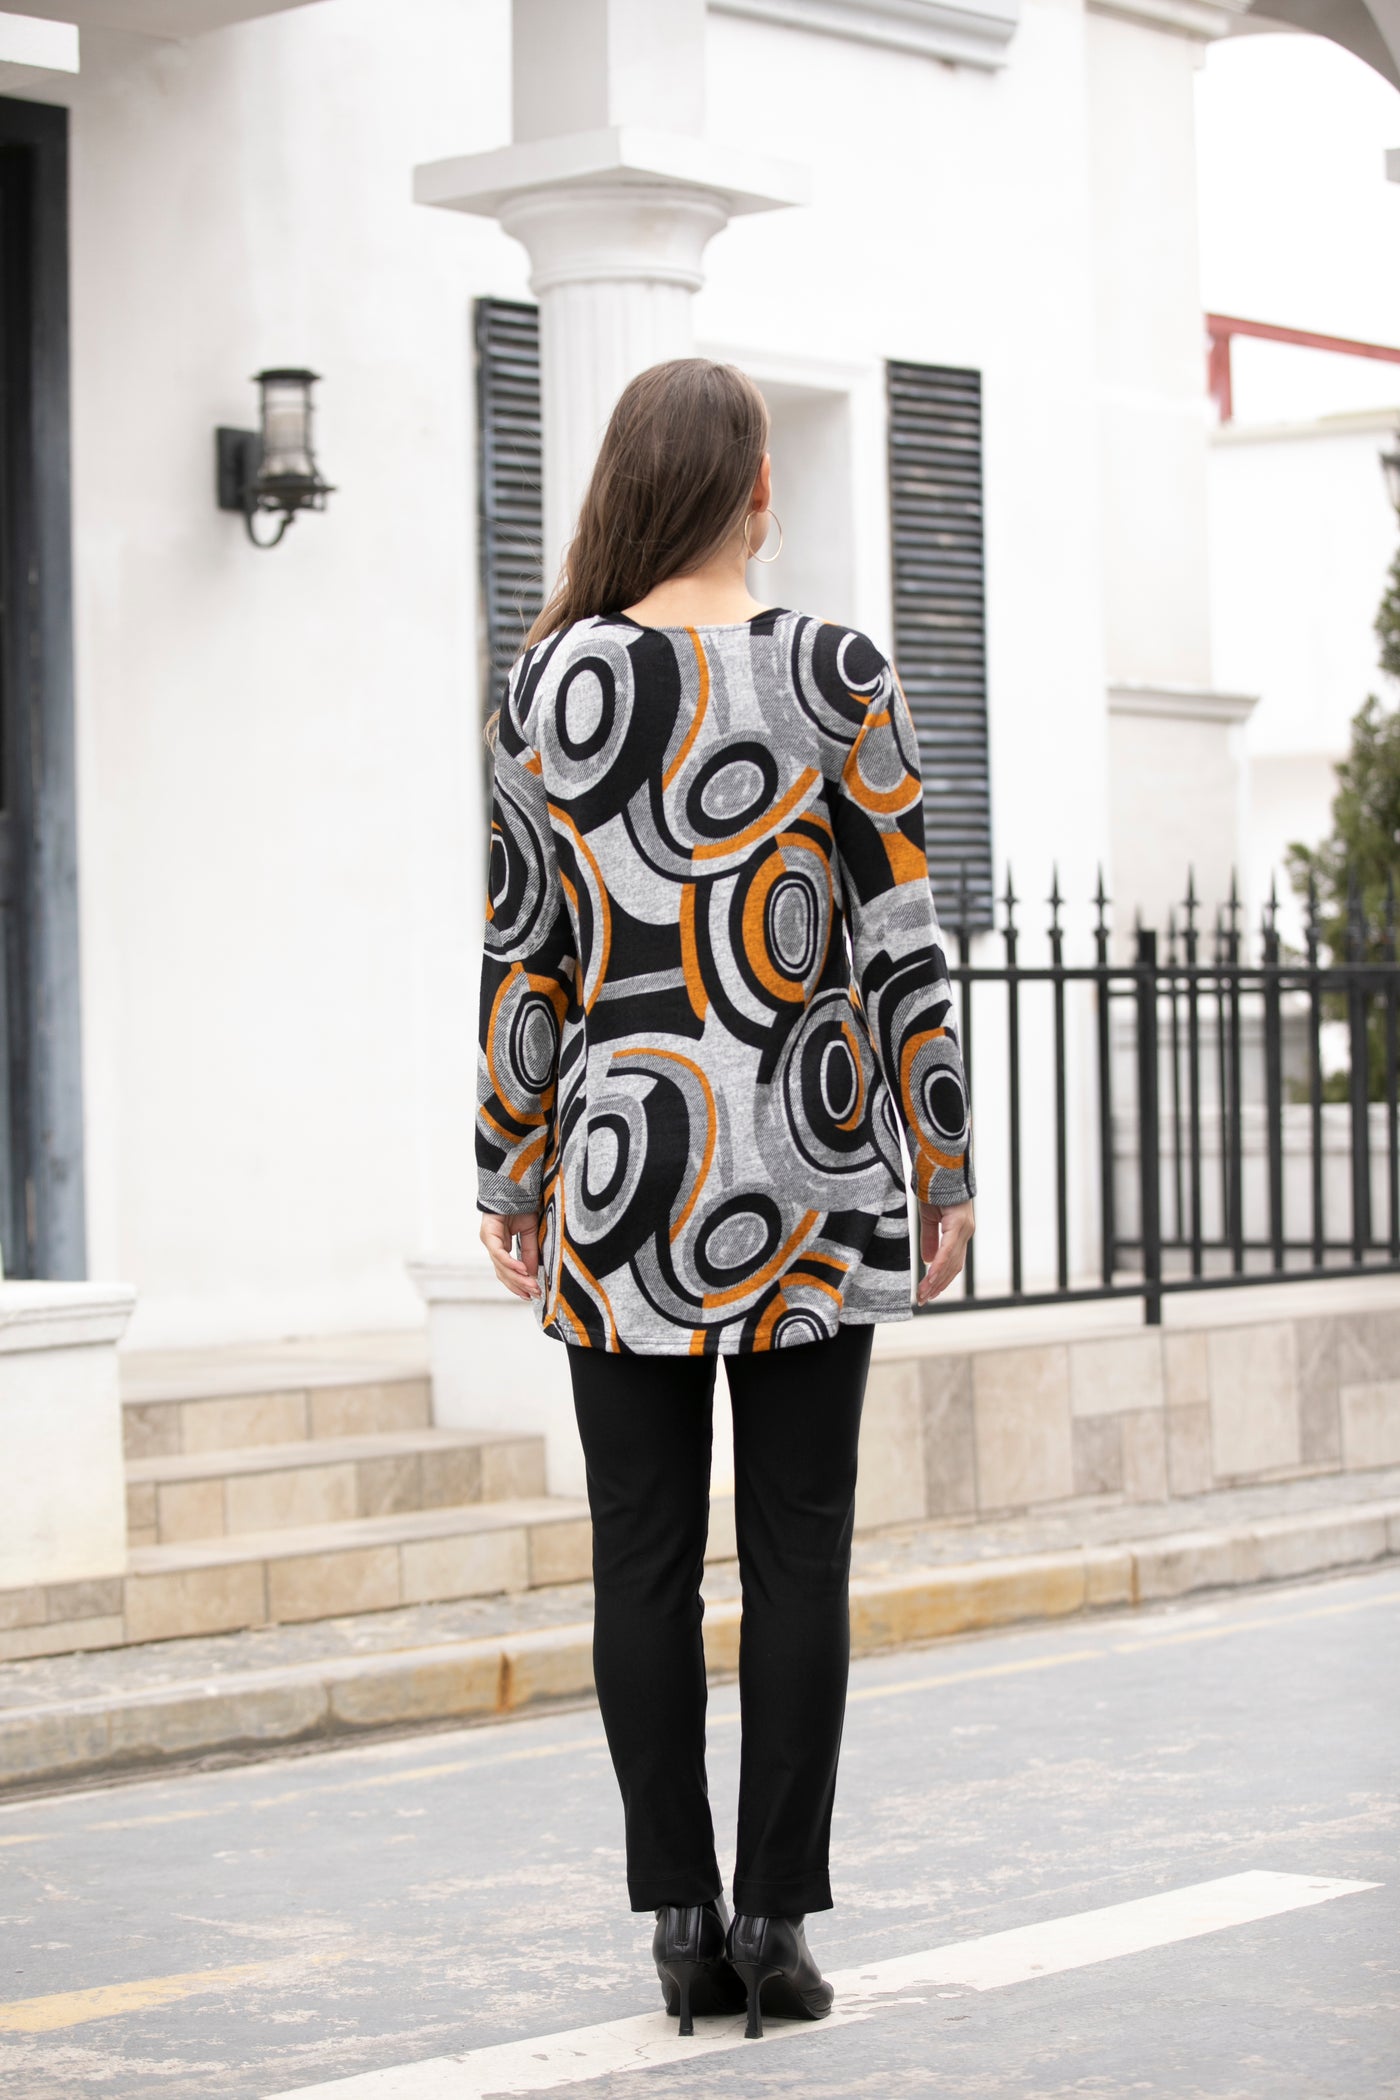 Carla's Printed Top with Pocket